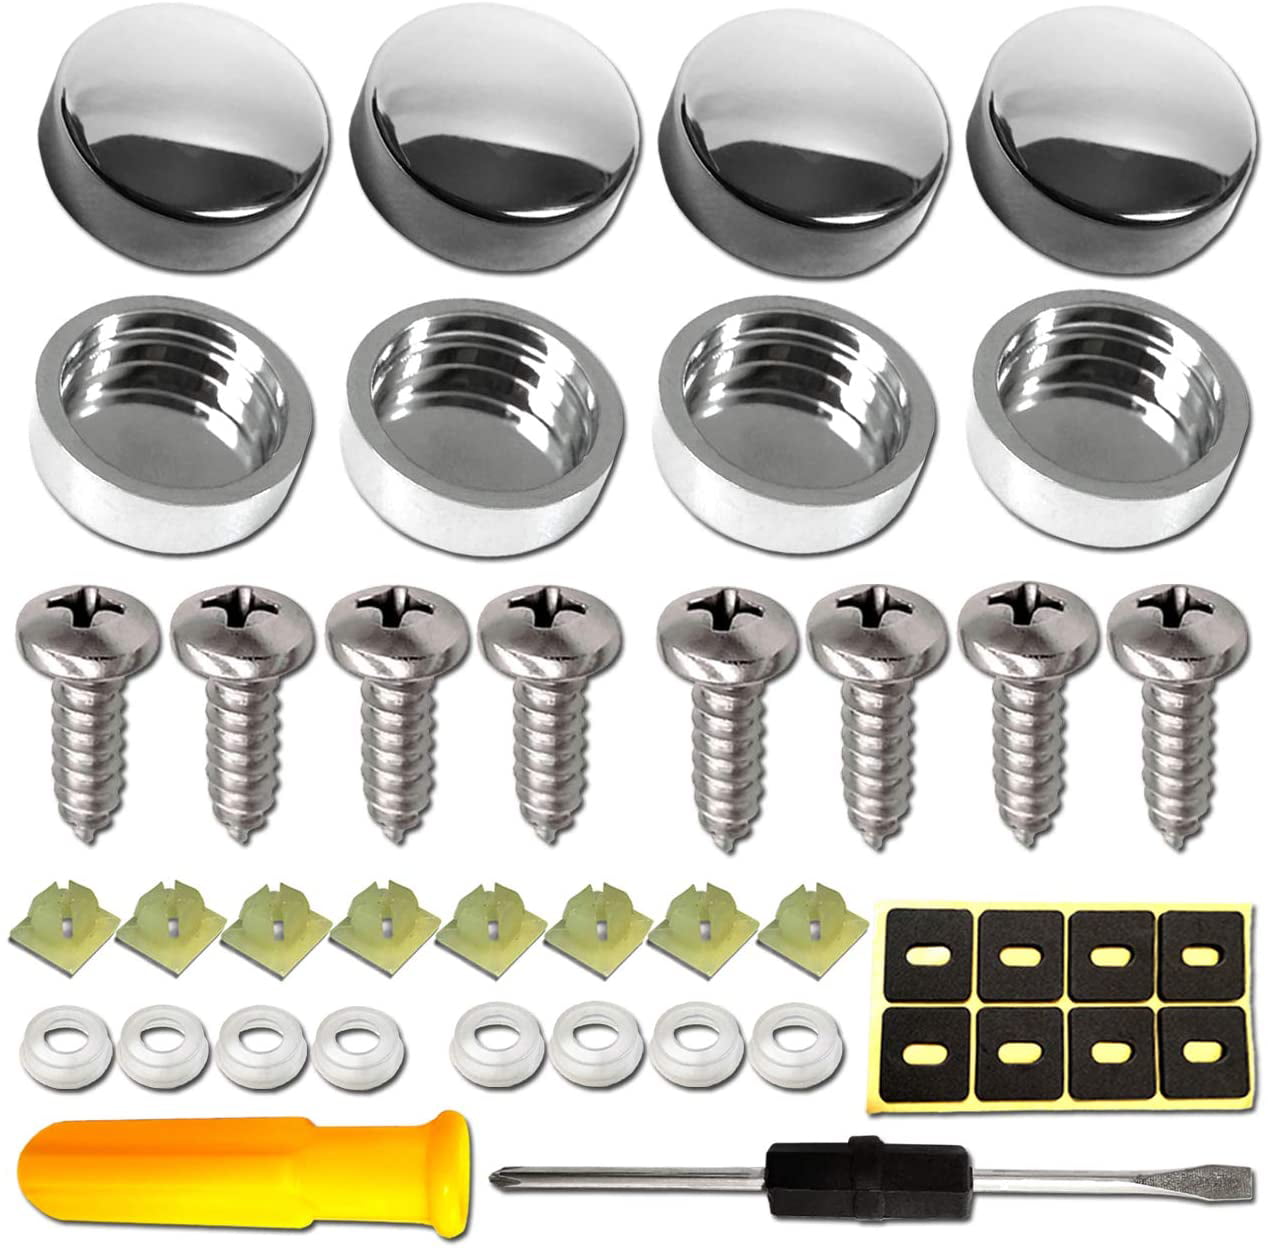 USA Fastener Company Stainless Steel License Plate Screws and Nylon Insert Rust Proof Screws Set of 4 Front or Rear Chrome Locking Screws License Plate Security Screws with Nylon nut Insert 